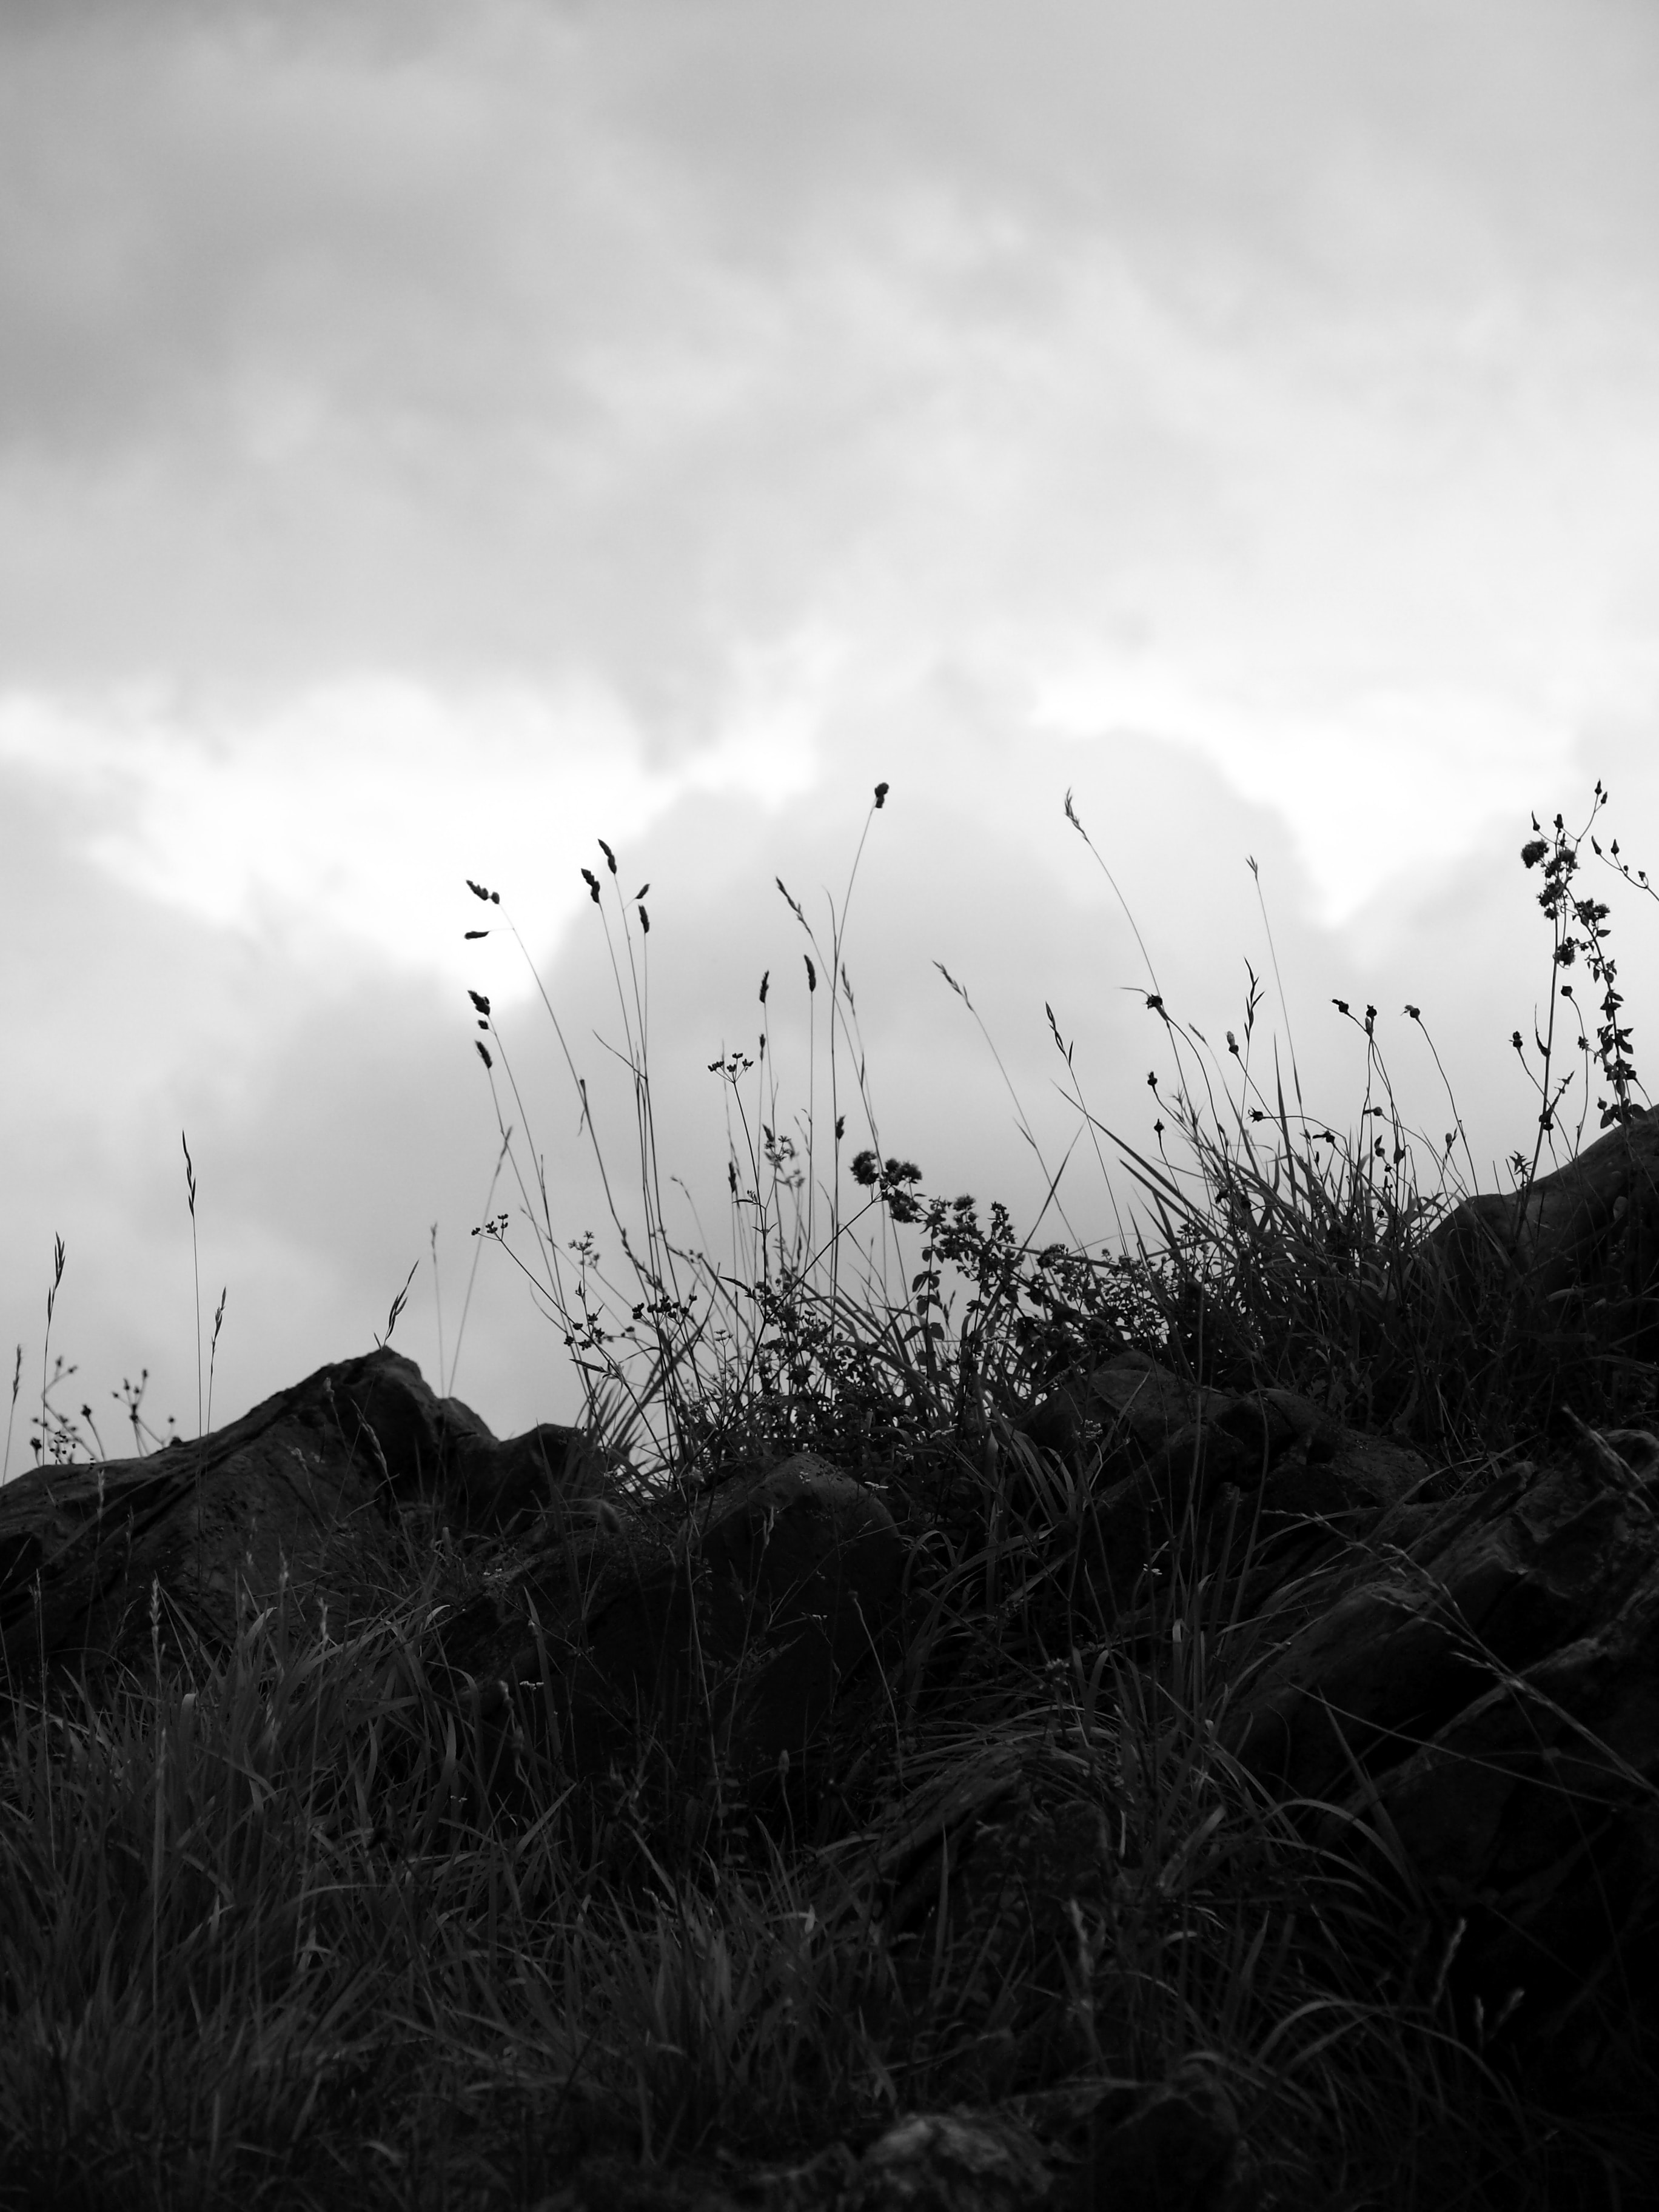 clouds, chb, nature, grass, stones, sky, bw, hill